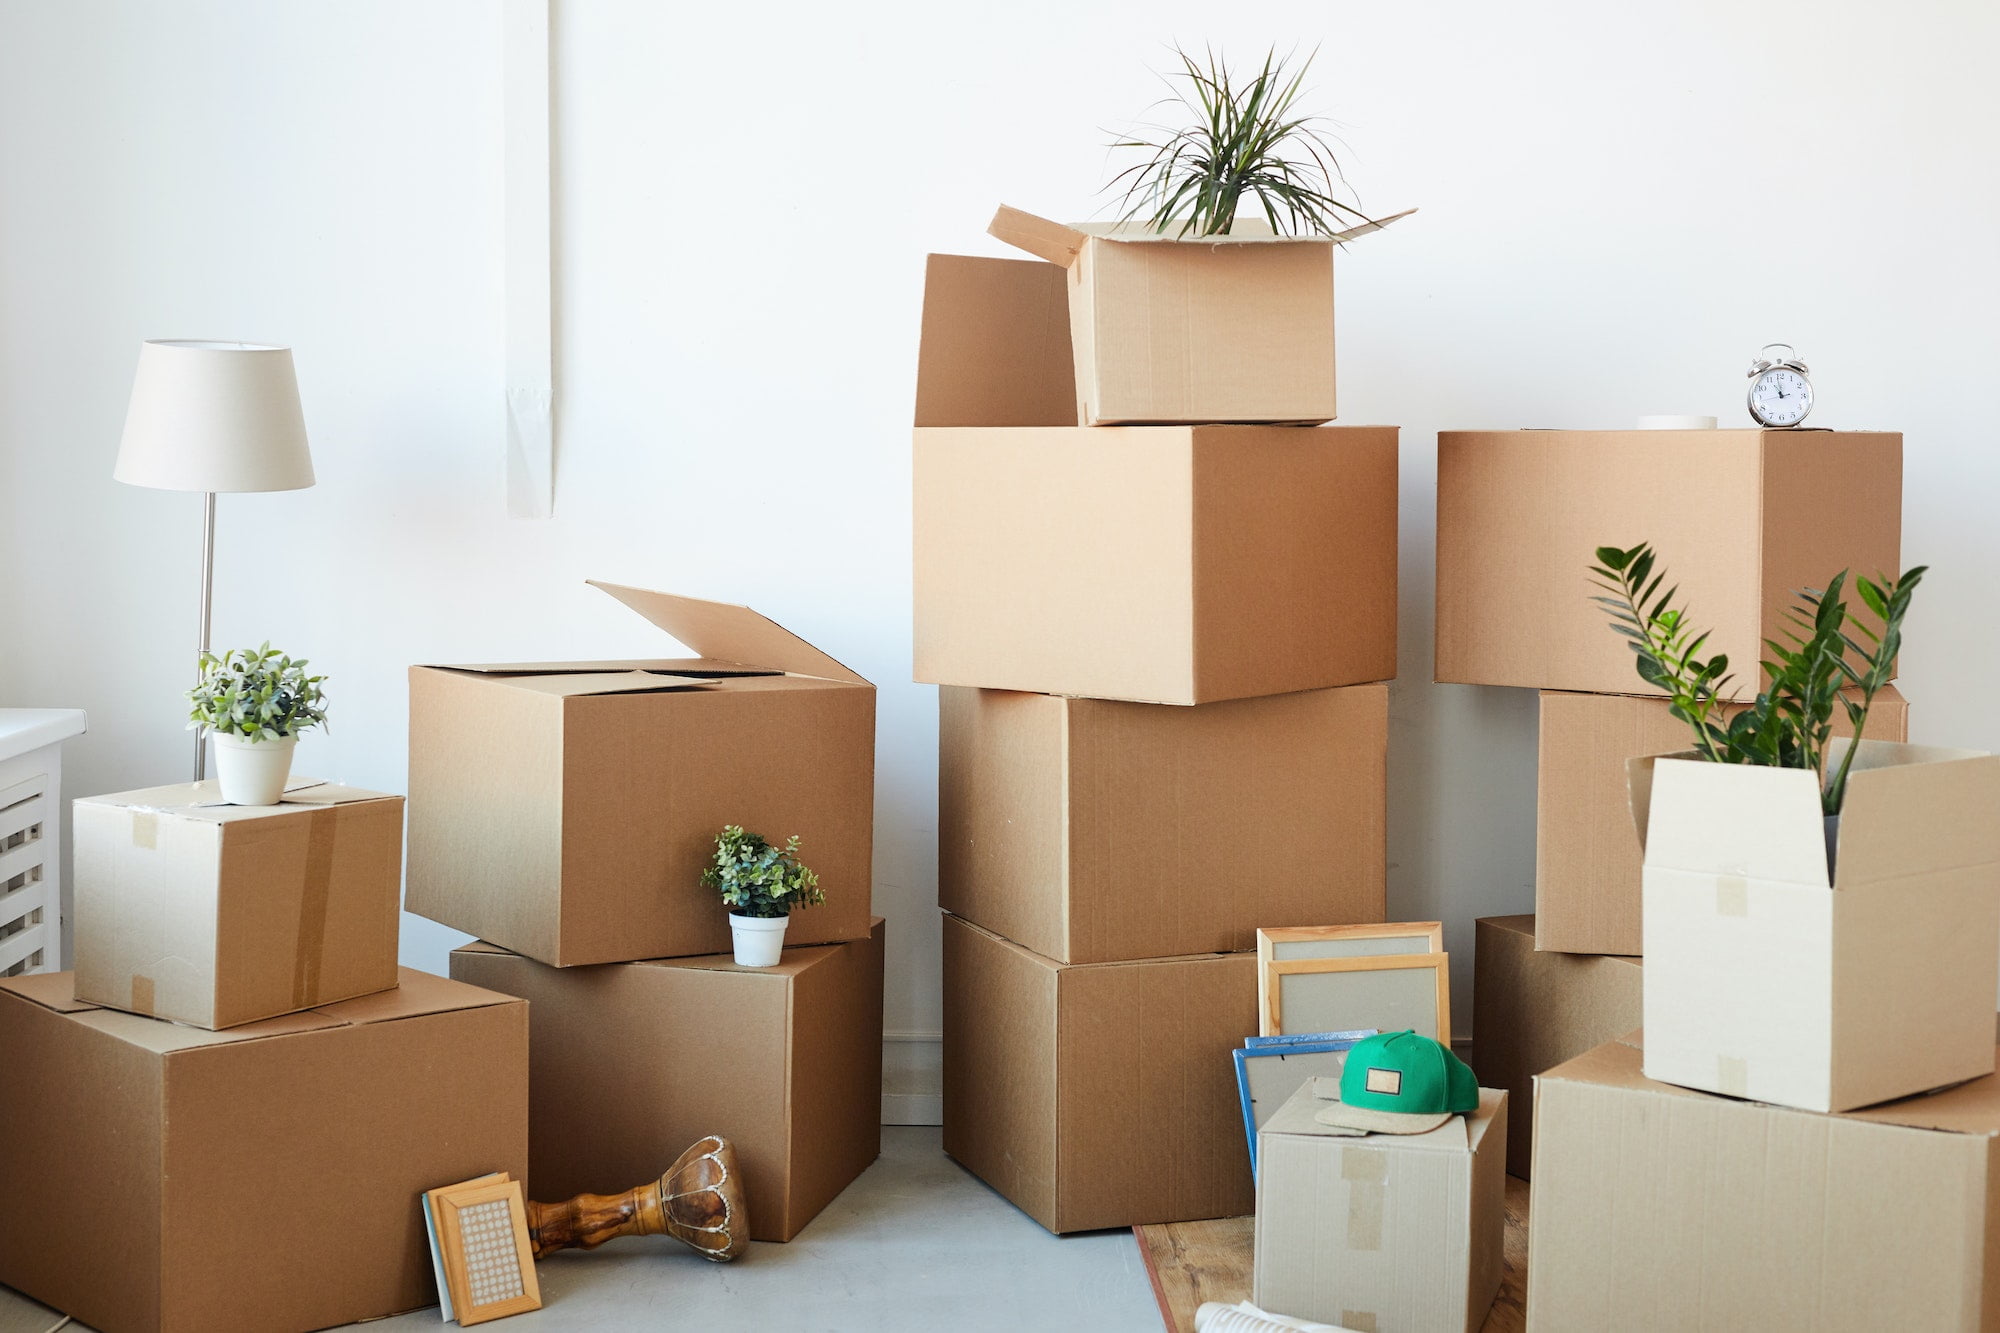 Moving boxes in a room with a plant and a lamp.